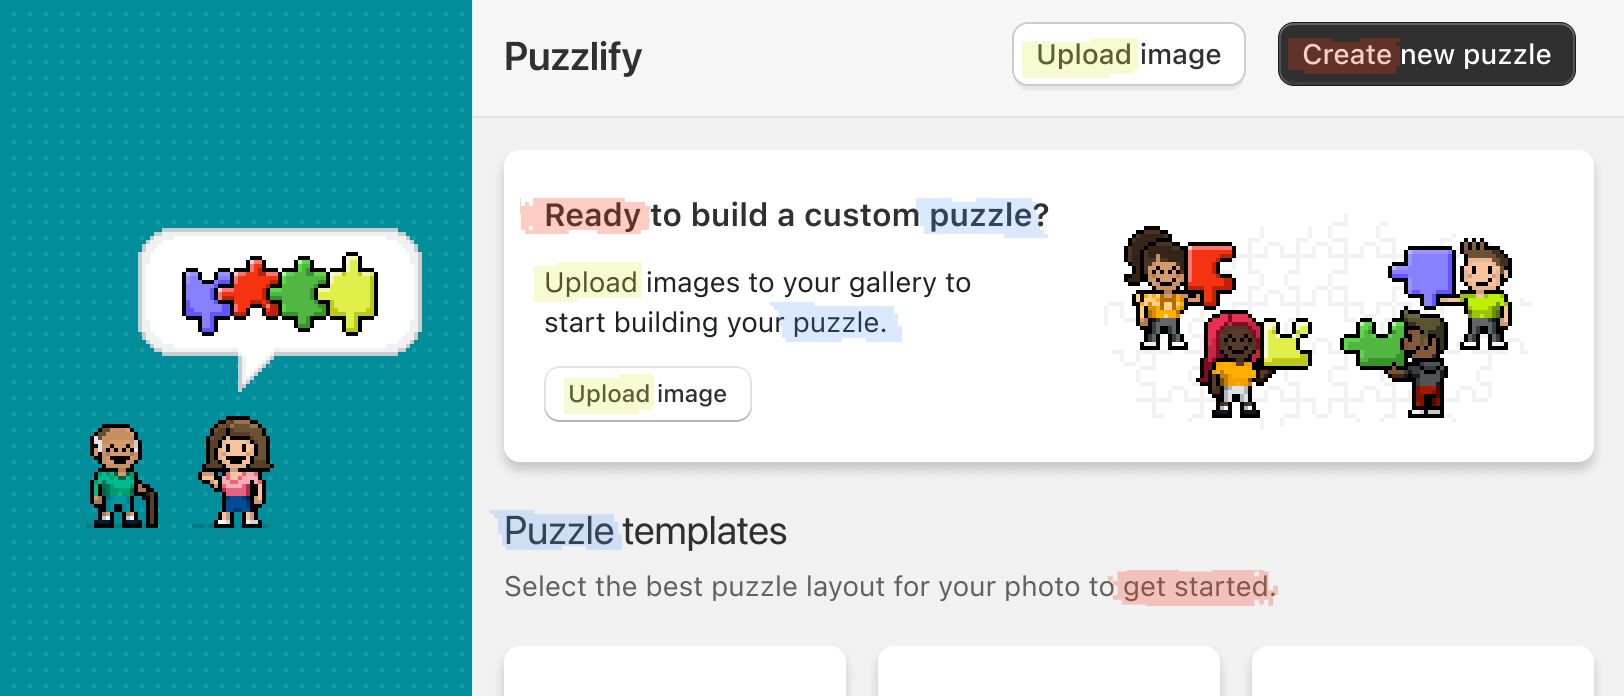 A mockup of the Puzzlify app with highlighted bits of text.